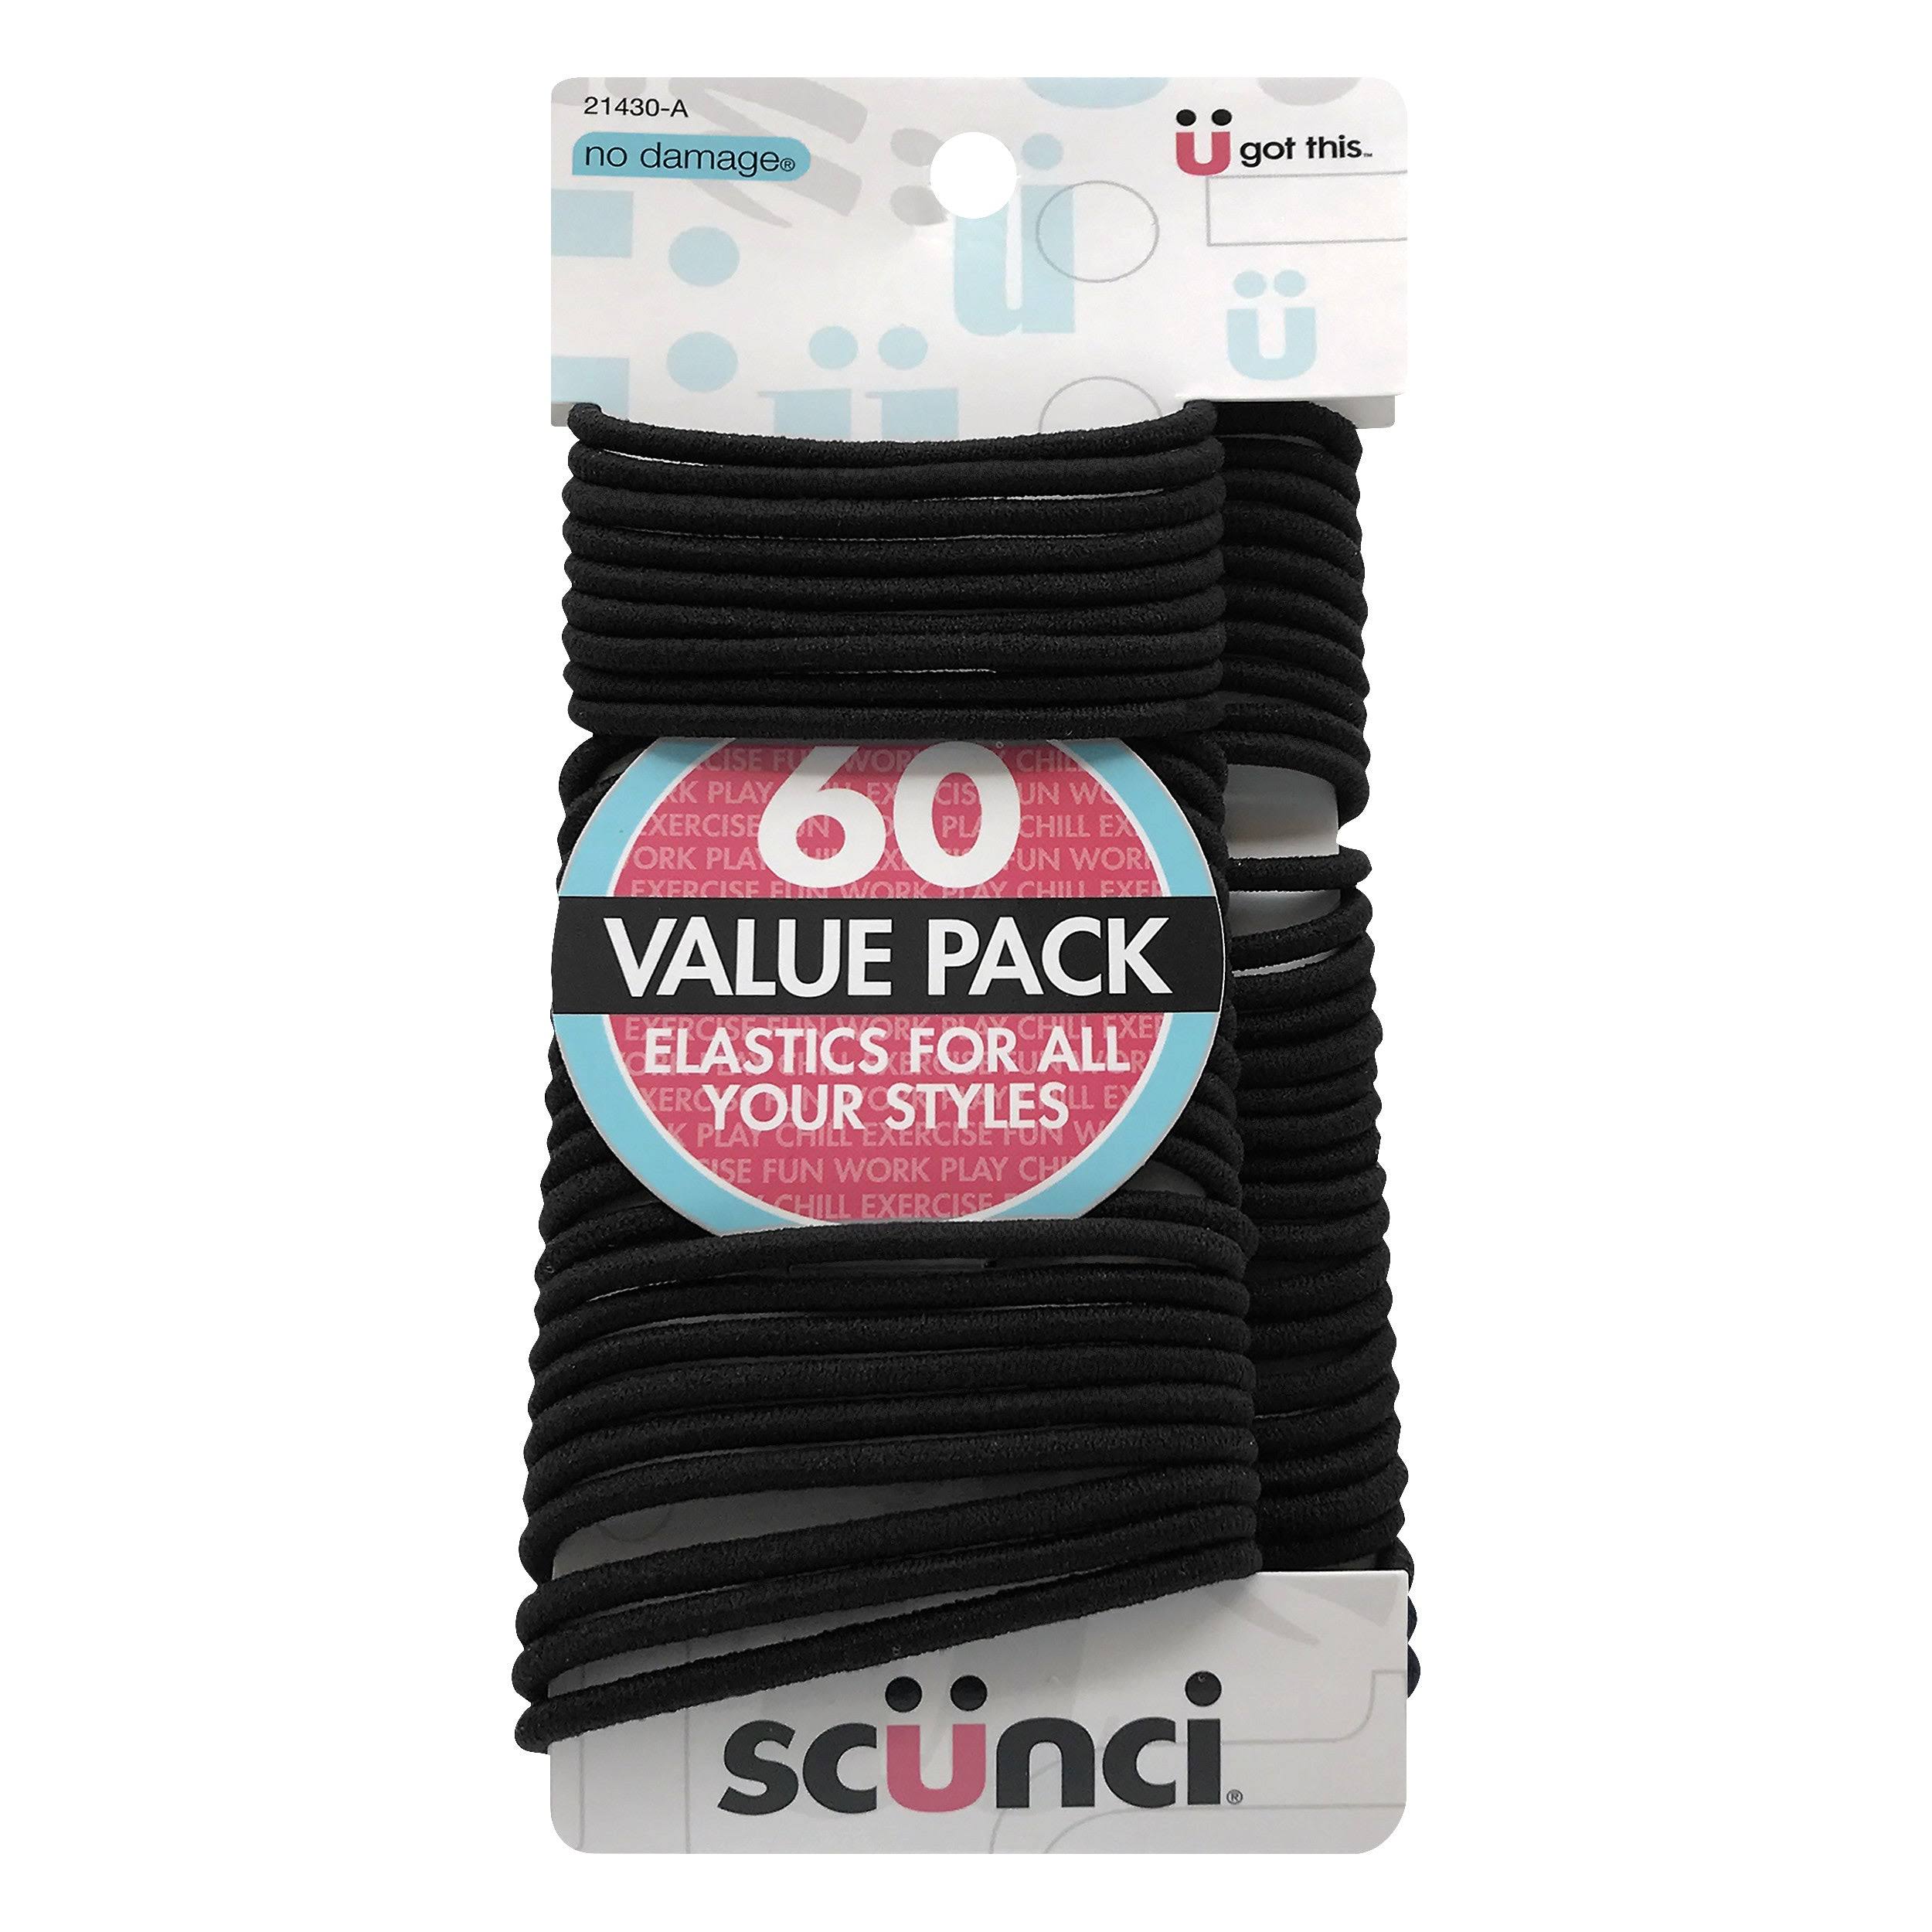 Scunci No Damage Hair Accessories Elastics and Ties - Black and Brown, 60ct, Pack of 3